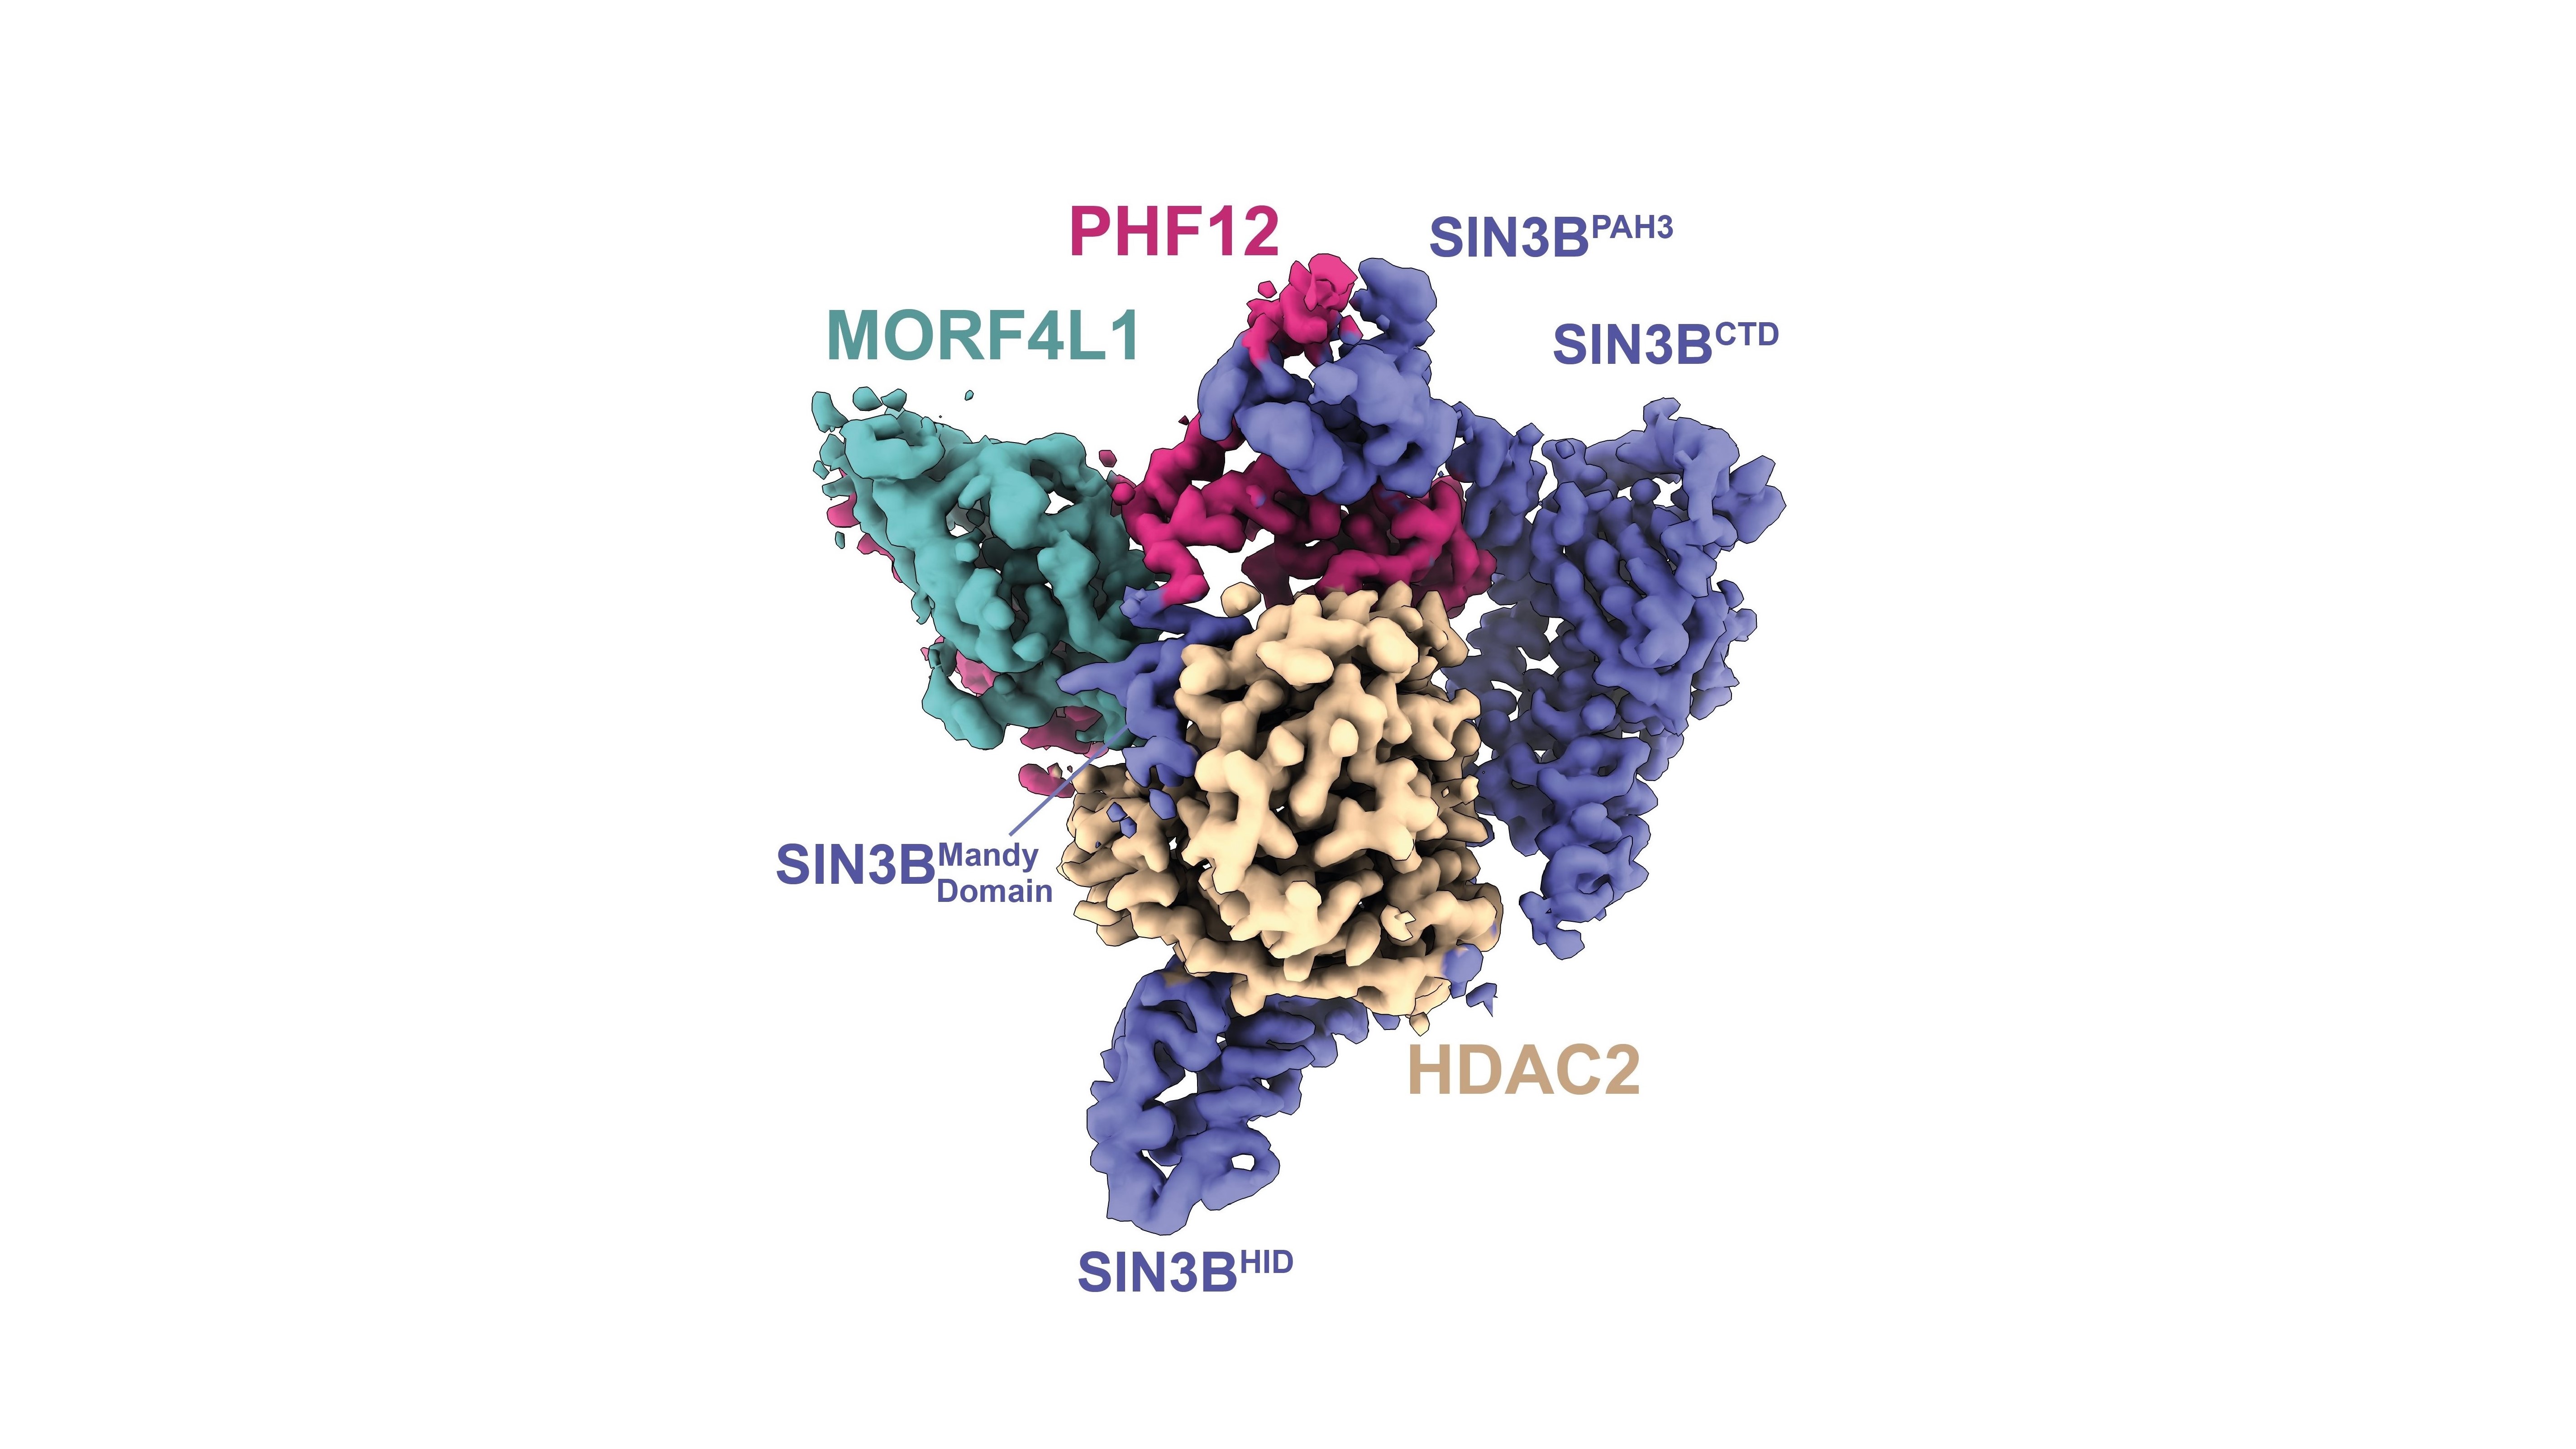 High-resolution 3D structure of the SIN3B protein complex